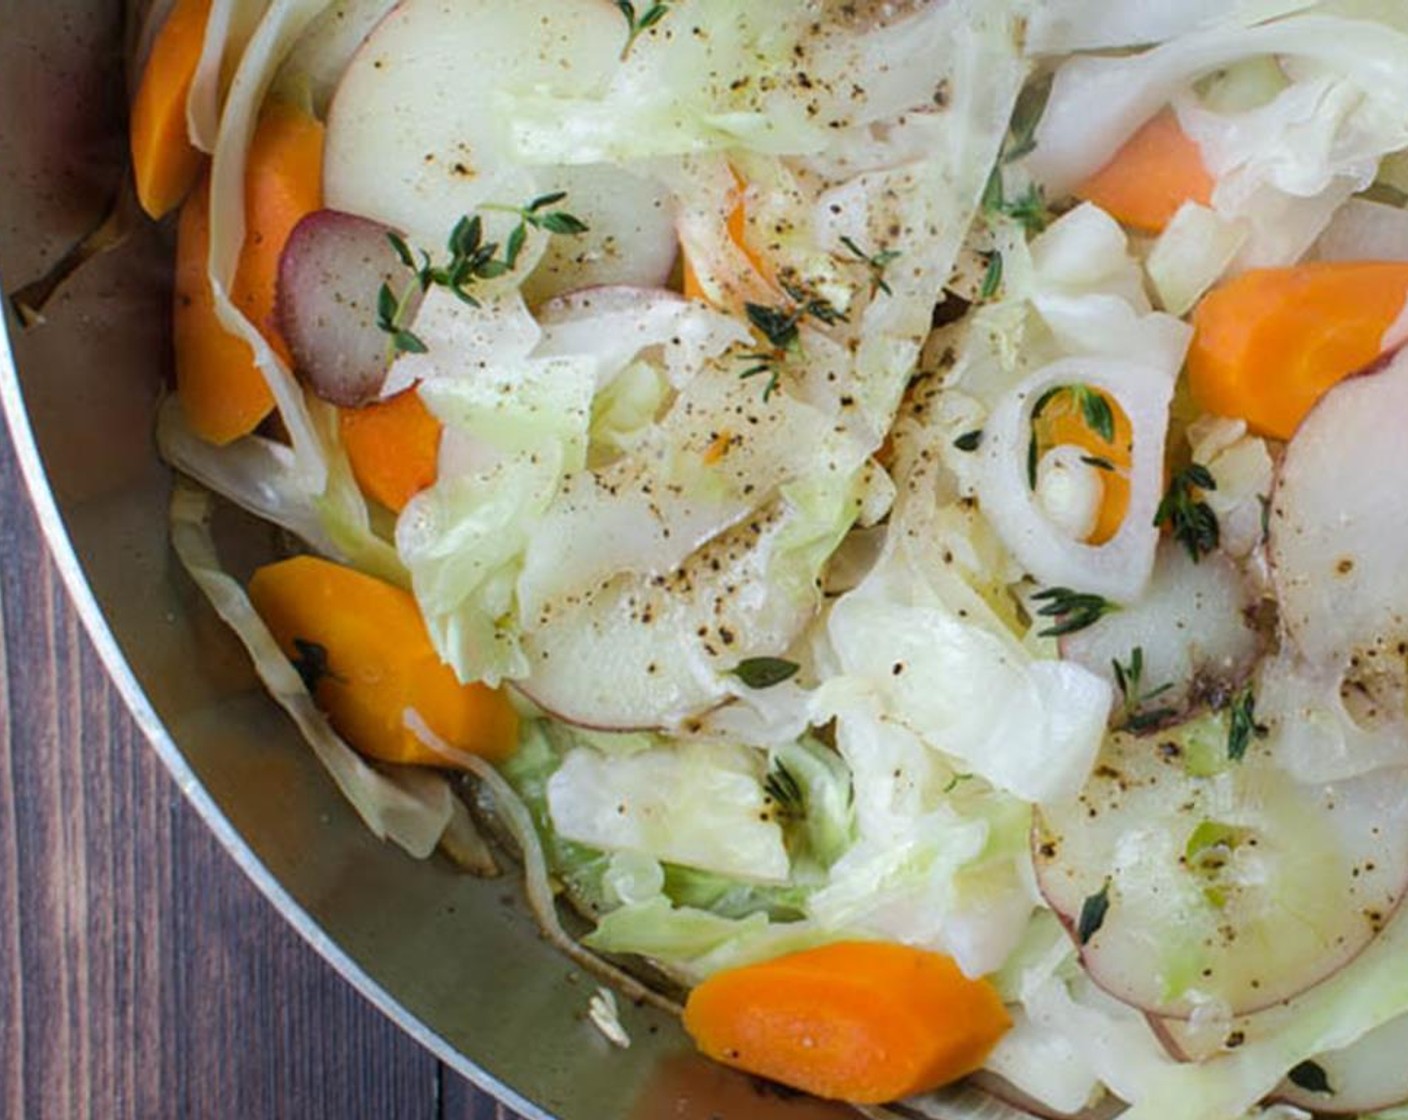 step 3 Pour Low-Sodium Chicken Broth (3/4 cup) over the vegetables, sprinkle with Kosher Salt (1/2 tsp) and Freshly Ground Black Pepper (1/4 tsp) and cover tightly. Simmer for 10 minutes.